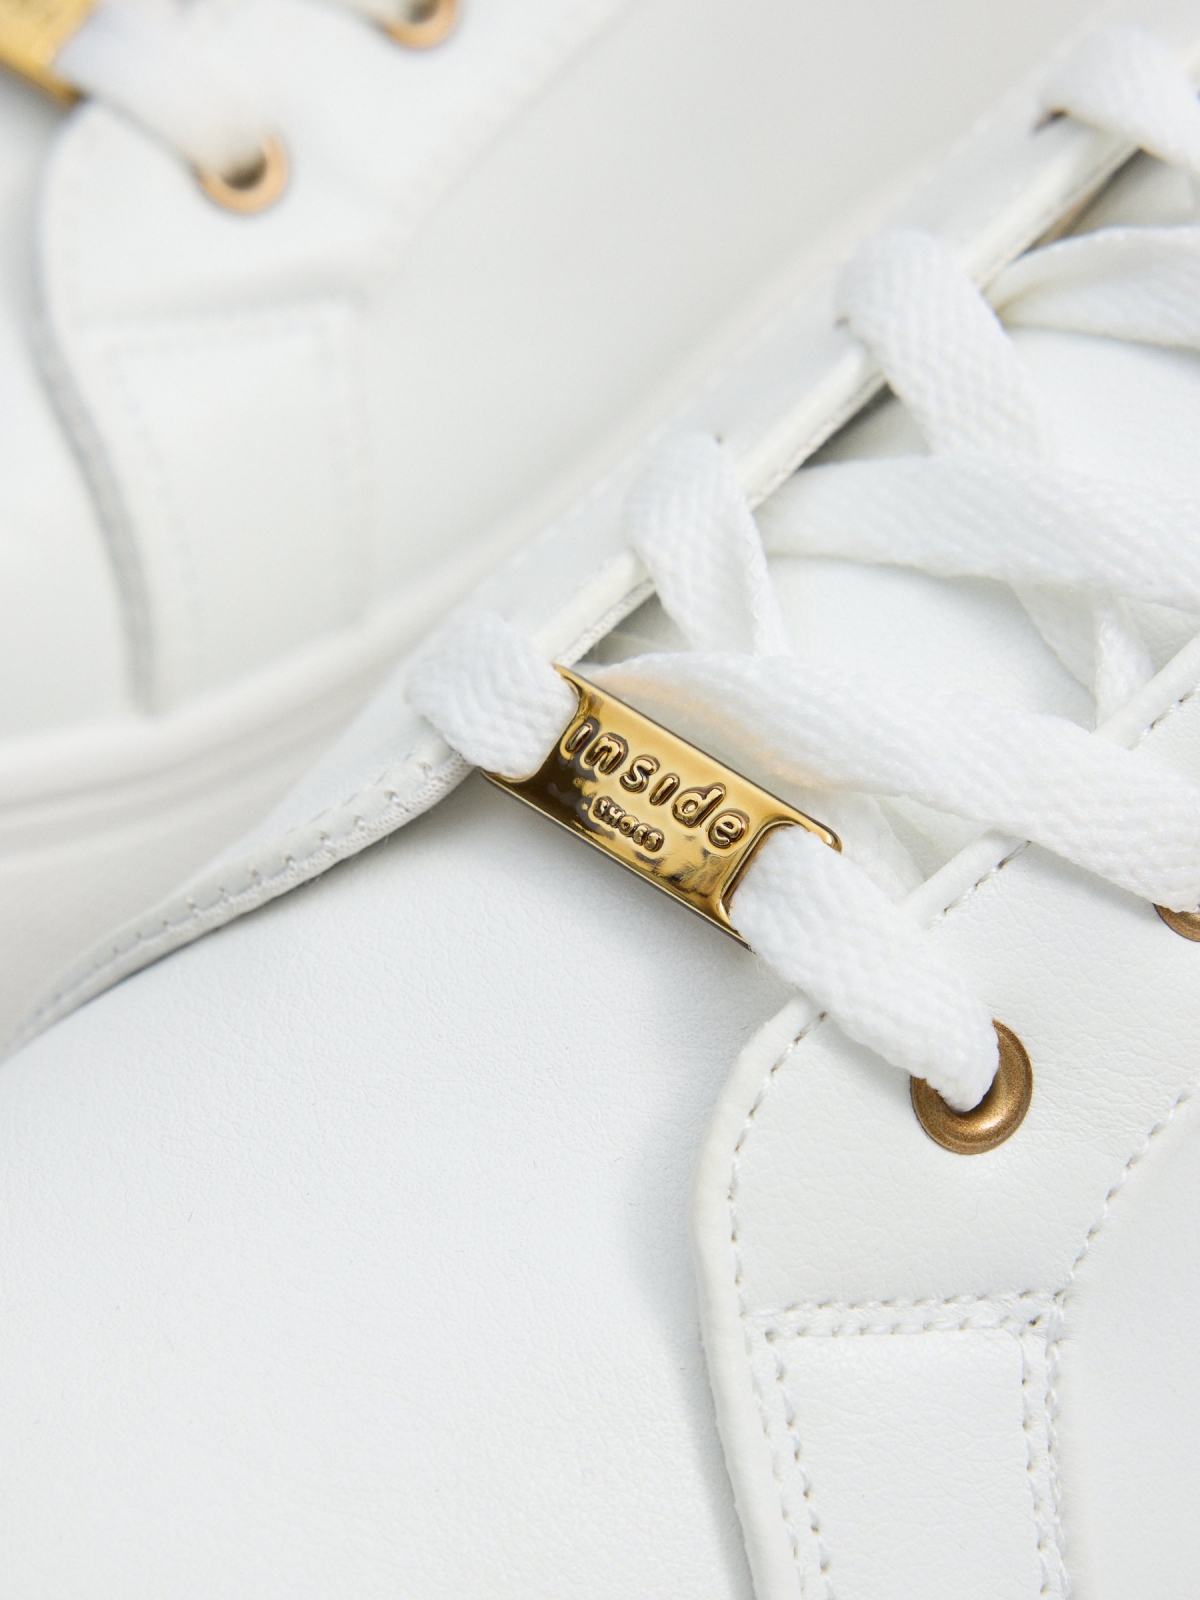 Platform sneakers with zip detail white detail view